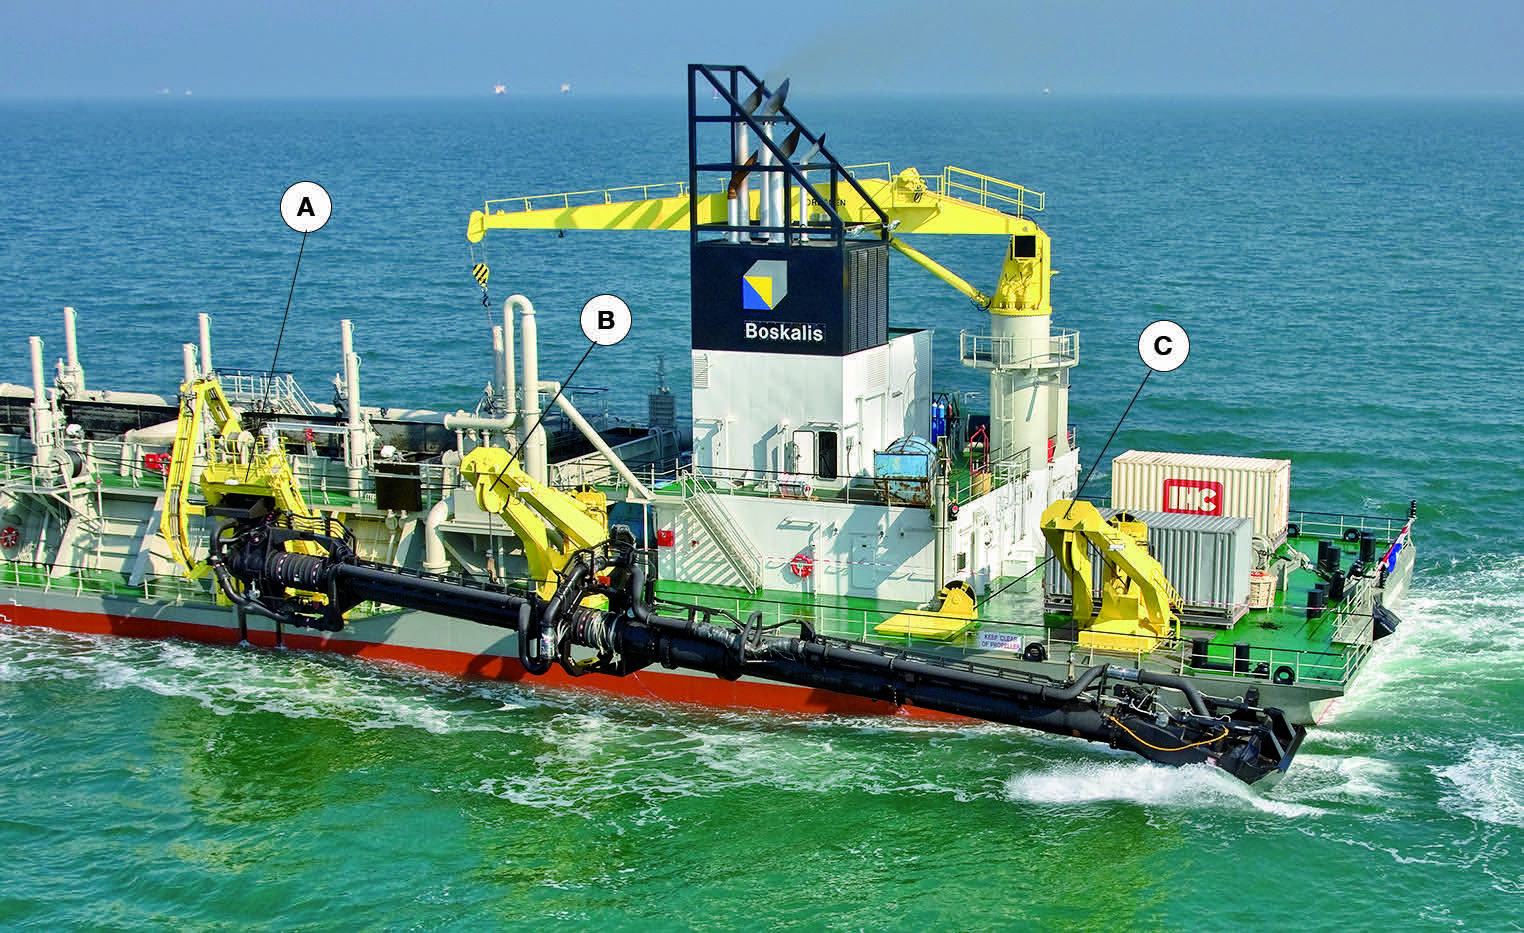 DREDGING AND DREDGERS